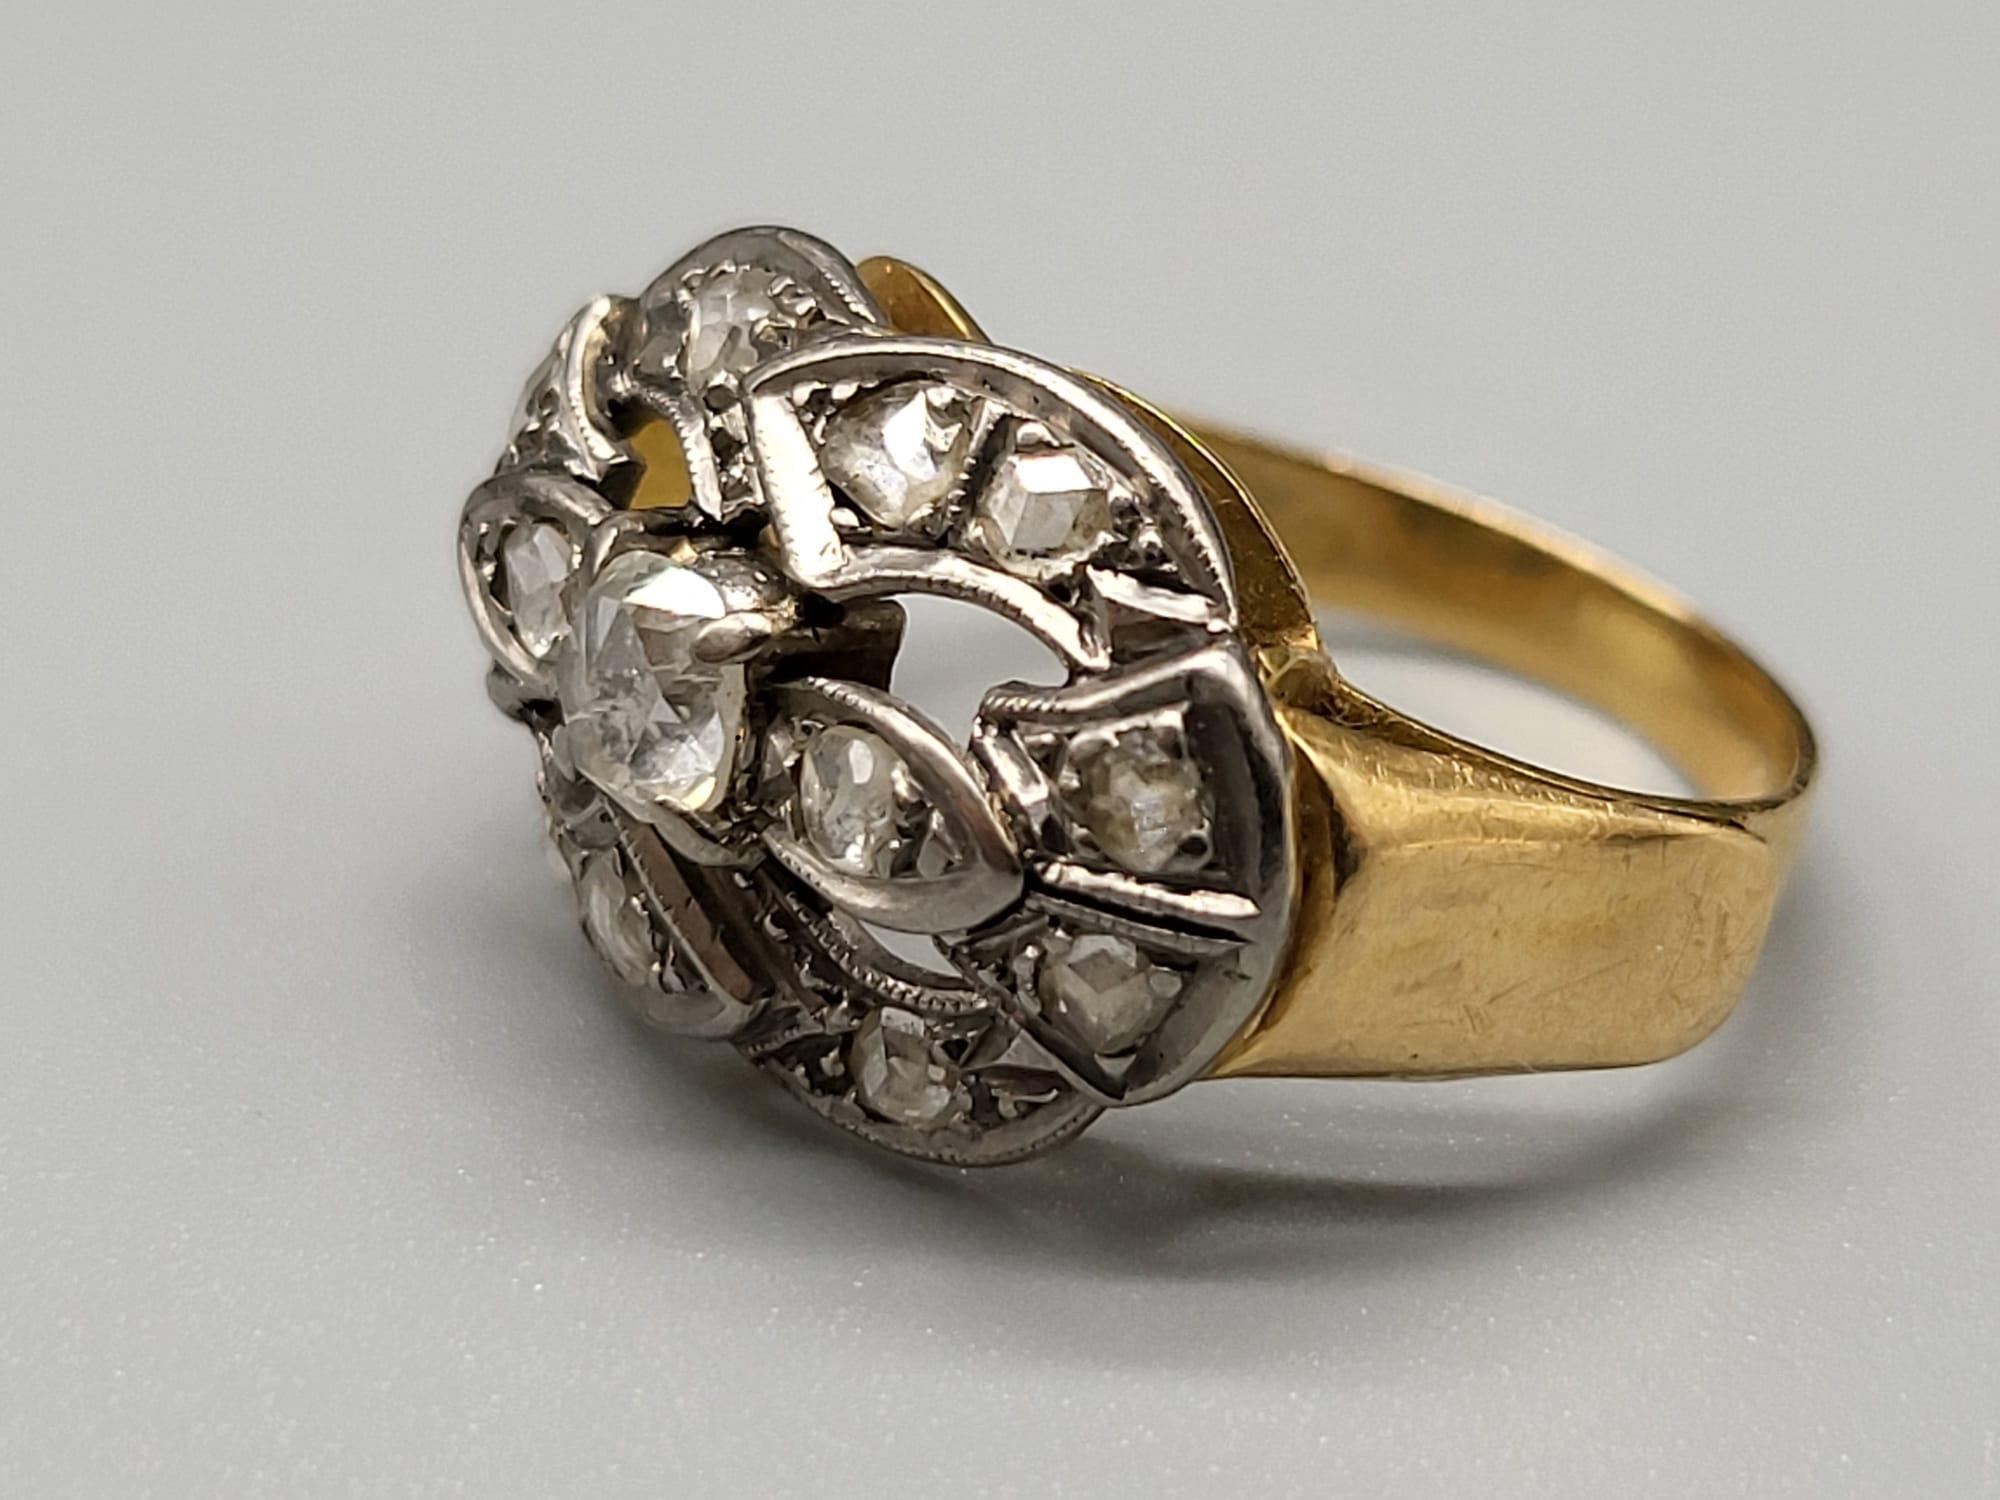 An Art Deco 18 K yellow gold ring with Diamonds. Ring size: M/N, weight: 4.4 g. - Image 2 of 5